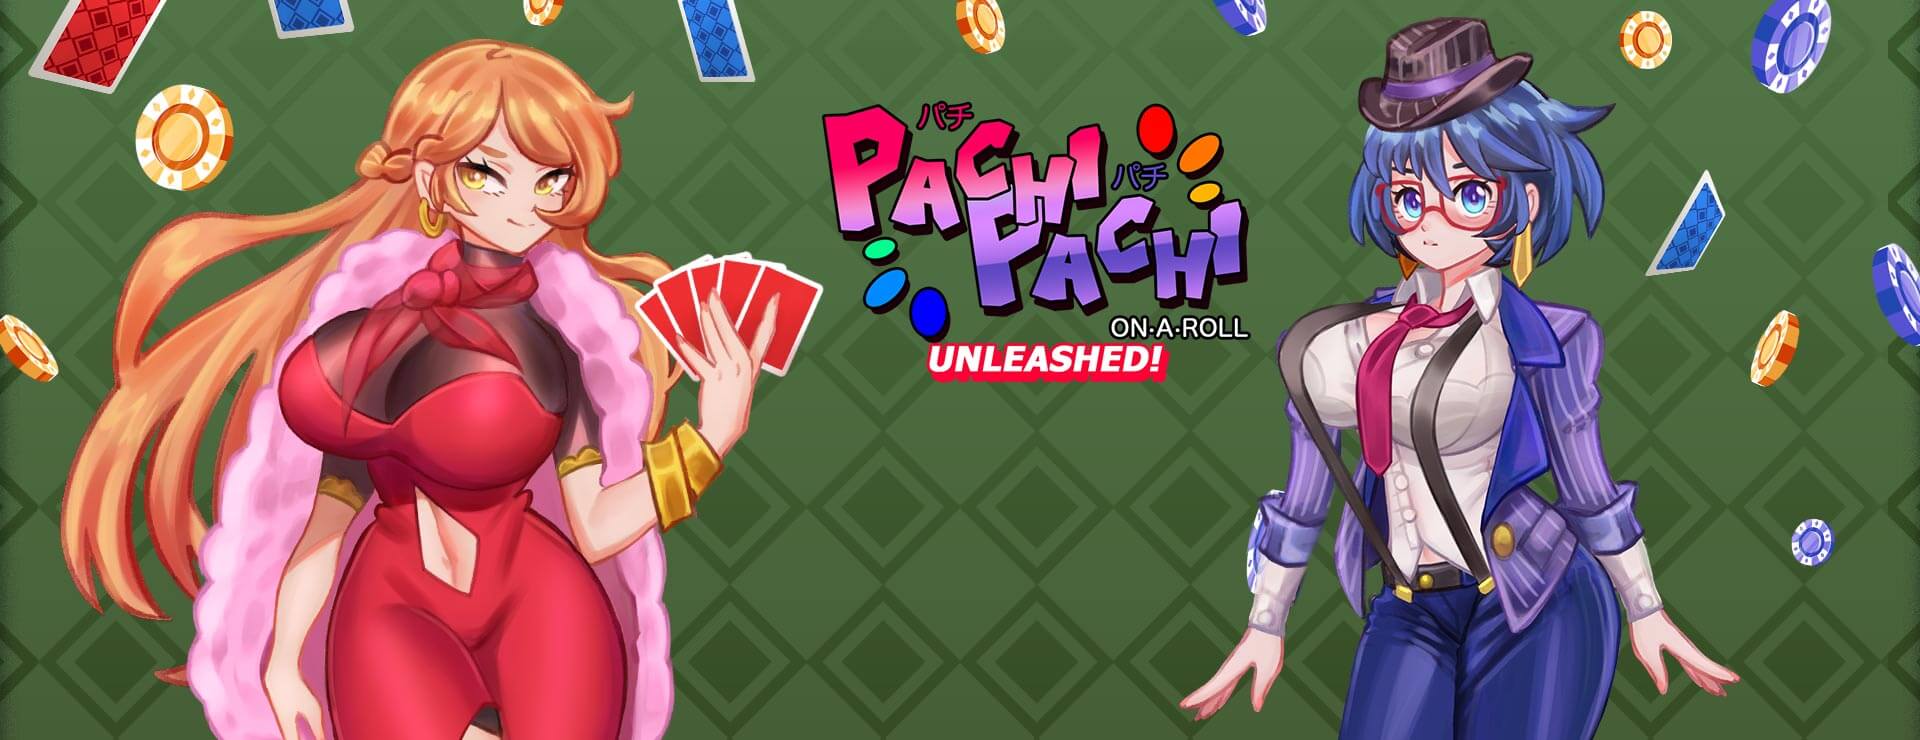 Pachi Pachi On A Roll Unleashed - Casual Game